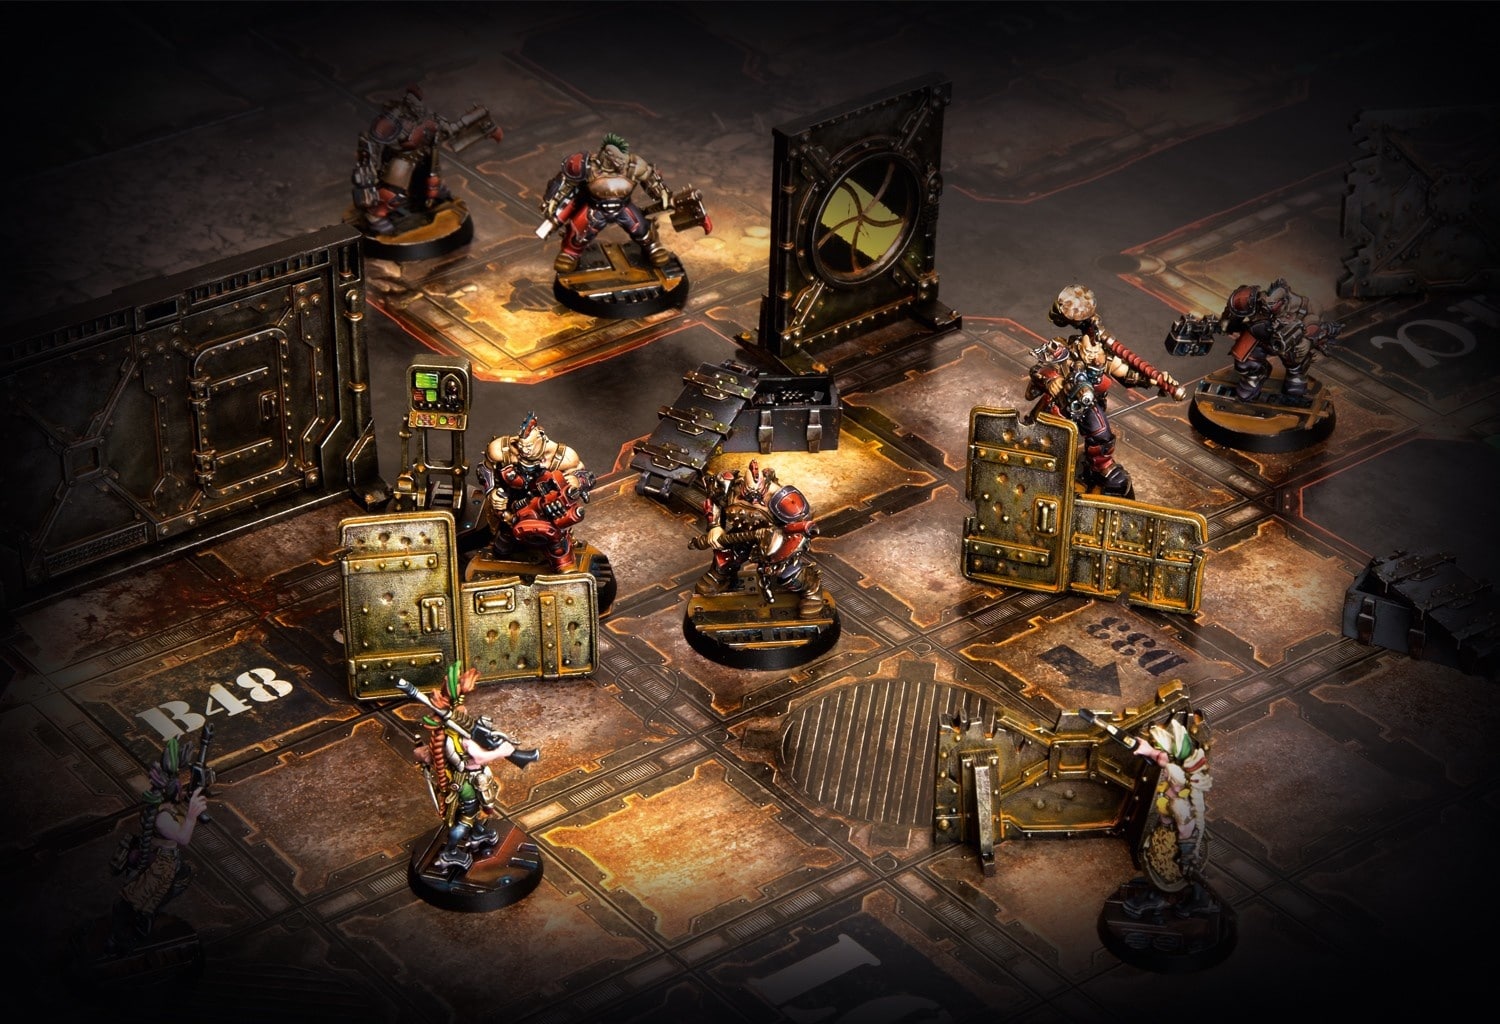 (Two gangs fight each other in the Necromunda scenario under the protection of various terrain buildings.)